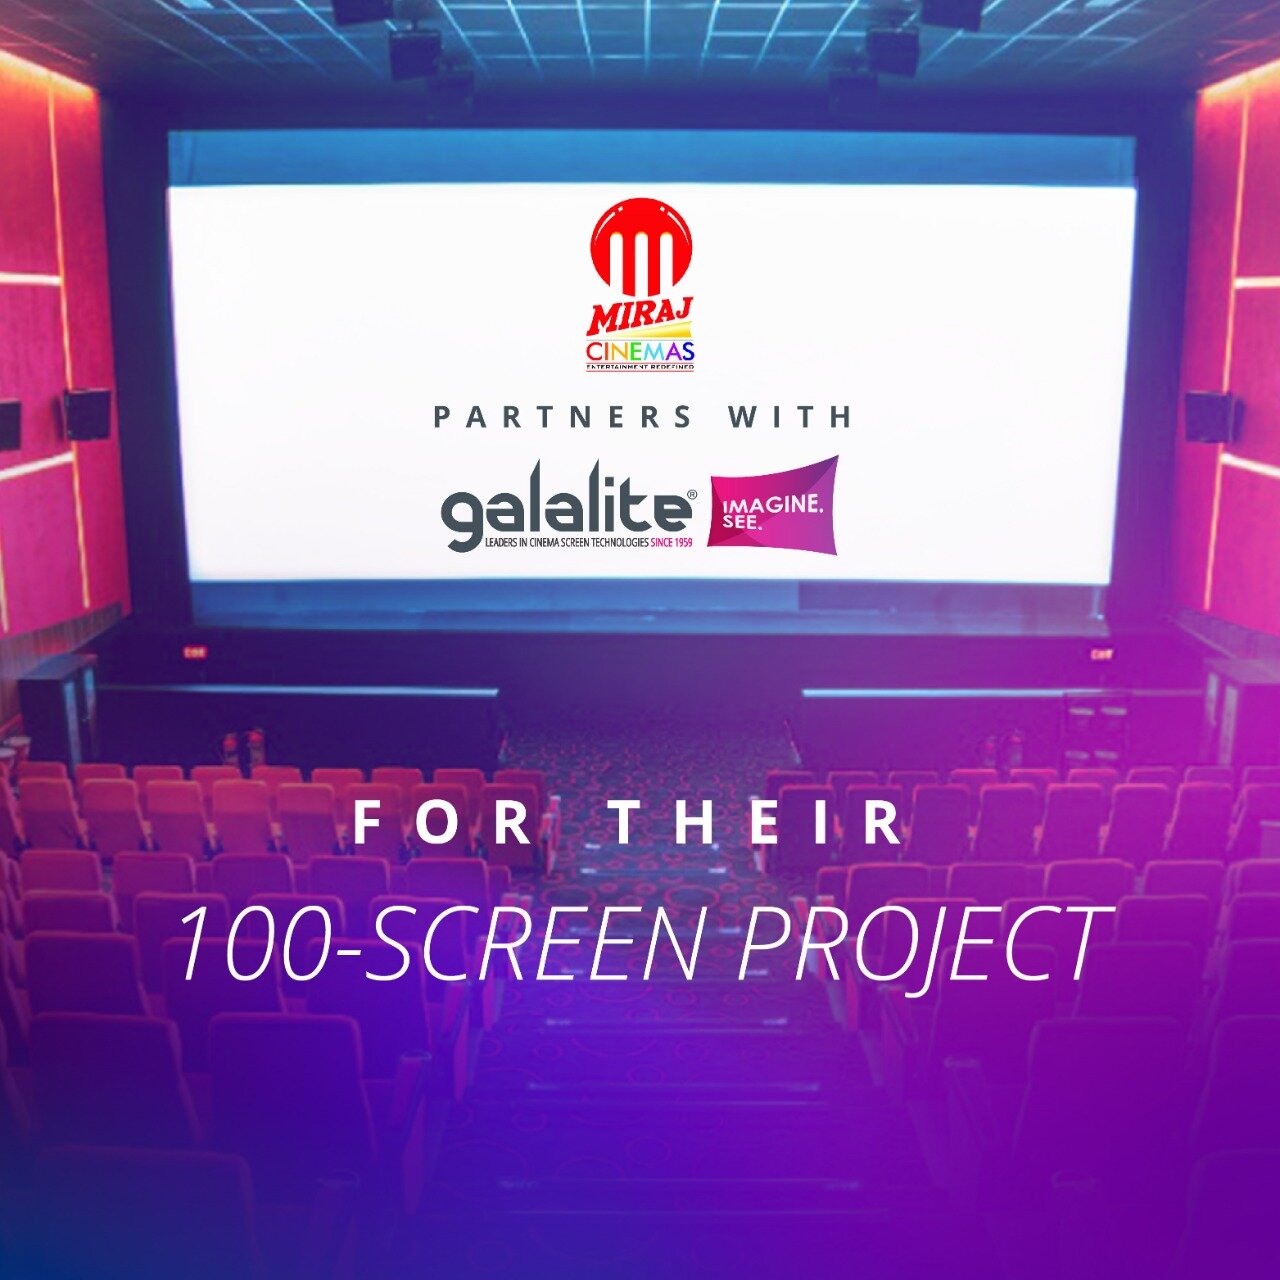 Miraj Cinemas Partners with Galalite for their 100-Screen Project